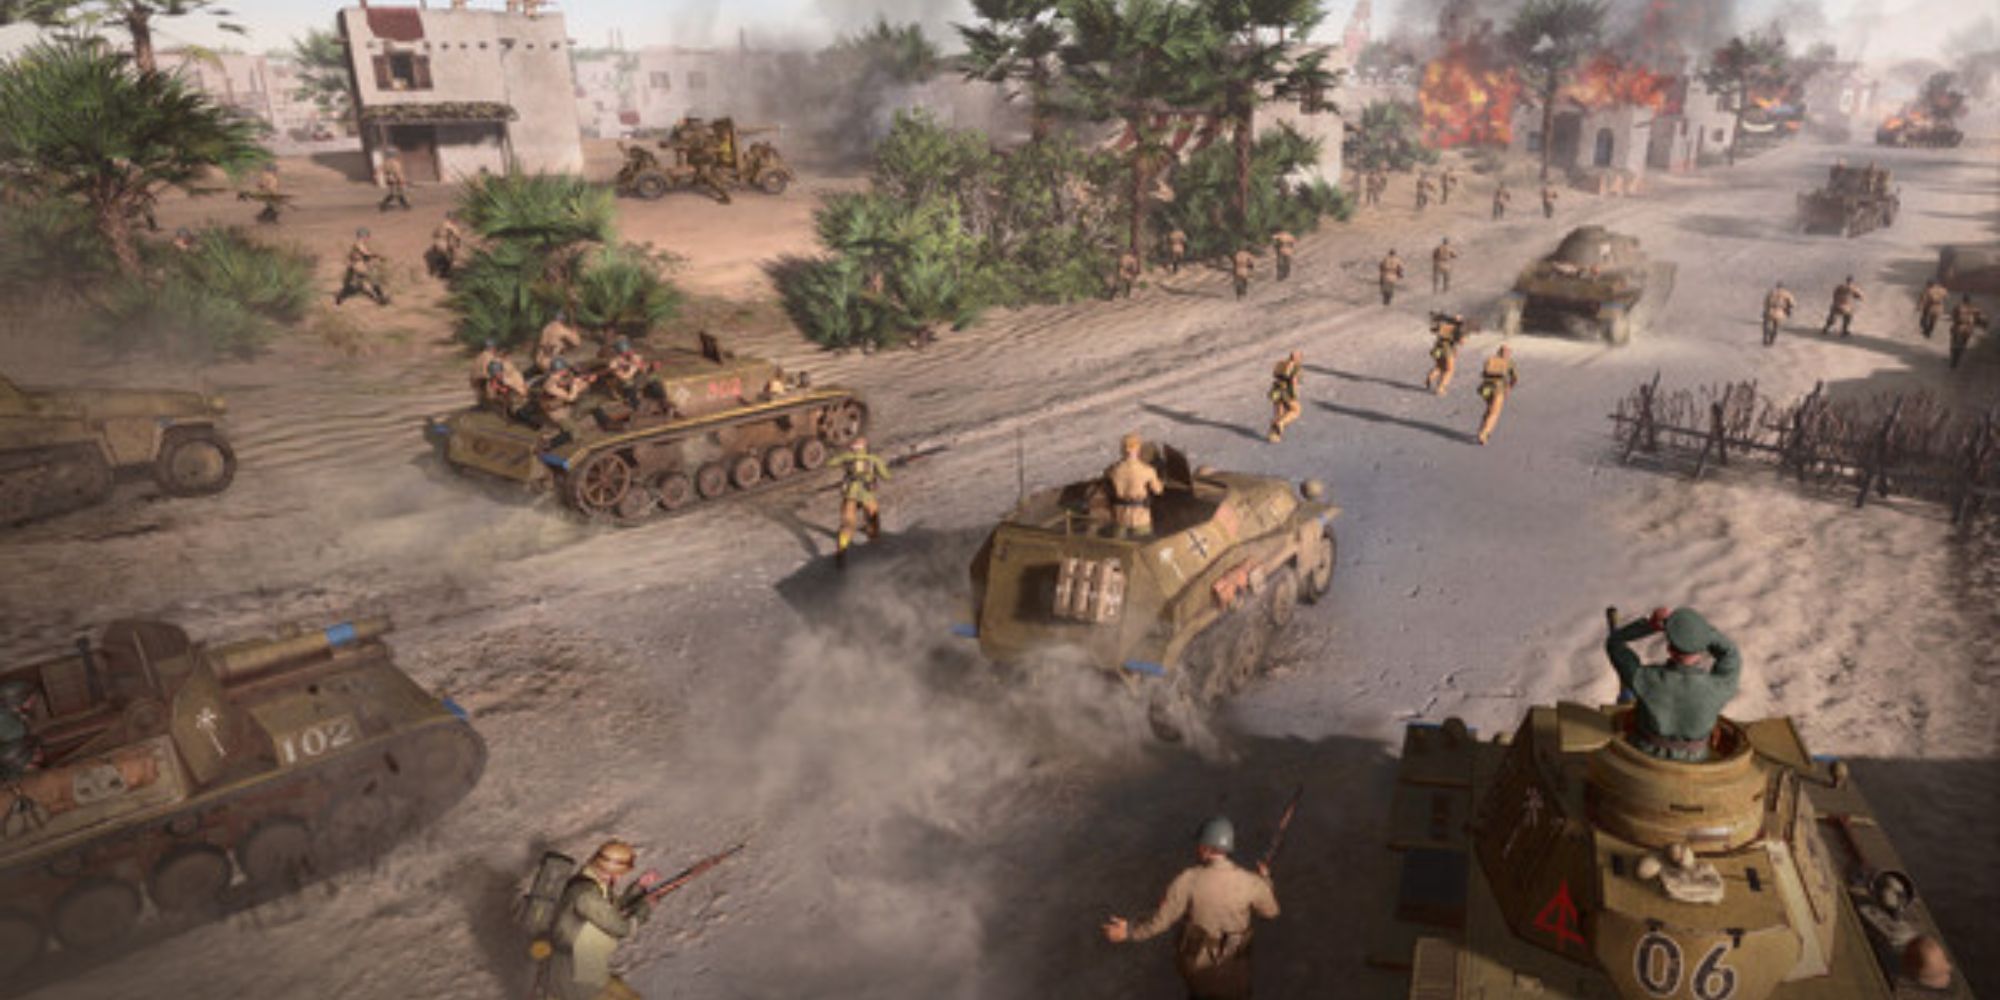 company of heroes 3 the afrikakorps faction attacks a village in the desert